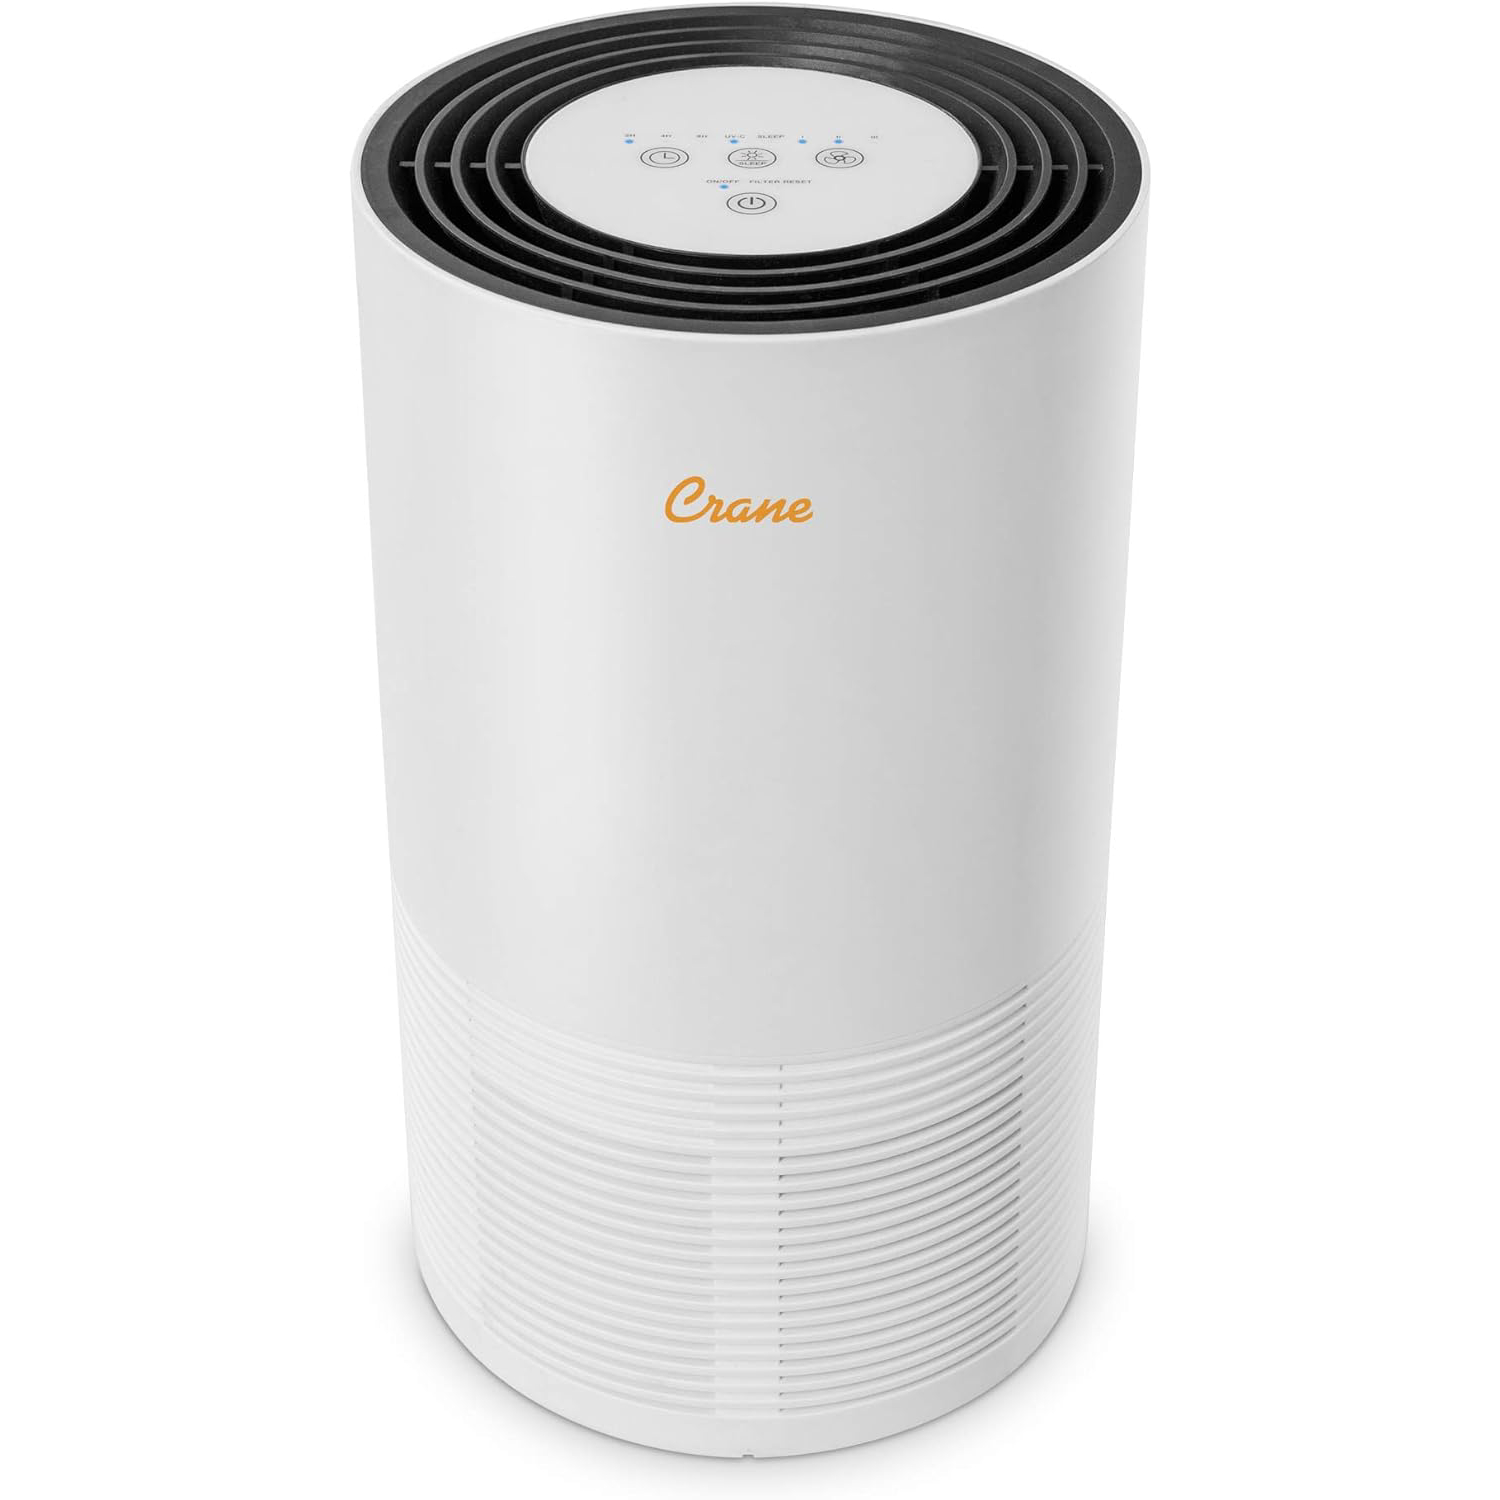 Crane Air Purifier with True HEPA Filter, Germicidal UV Light, 300 Sq Feet Coverage, Timer Function, Sleep Mode, Washable Particle Filter, EE-5068 new